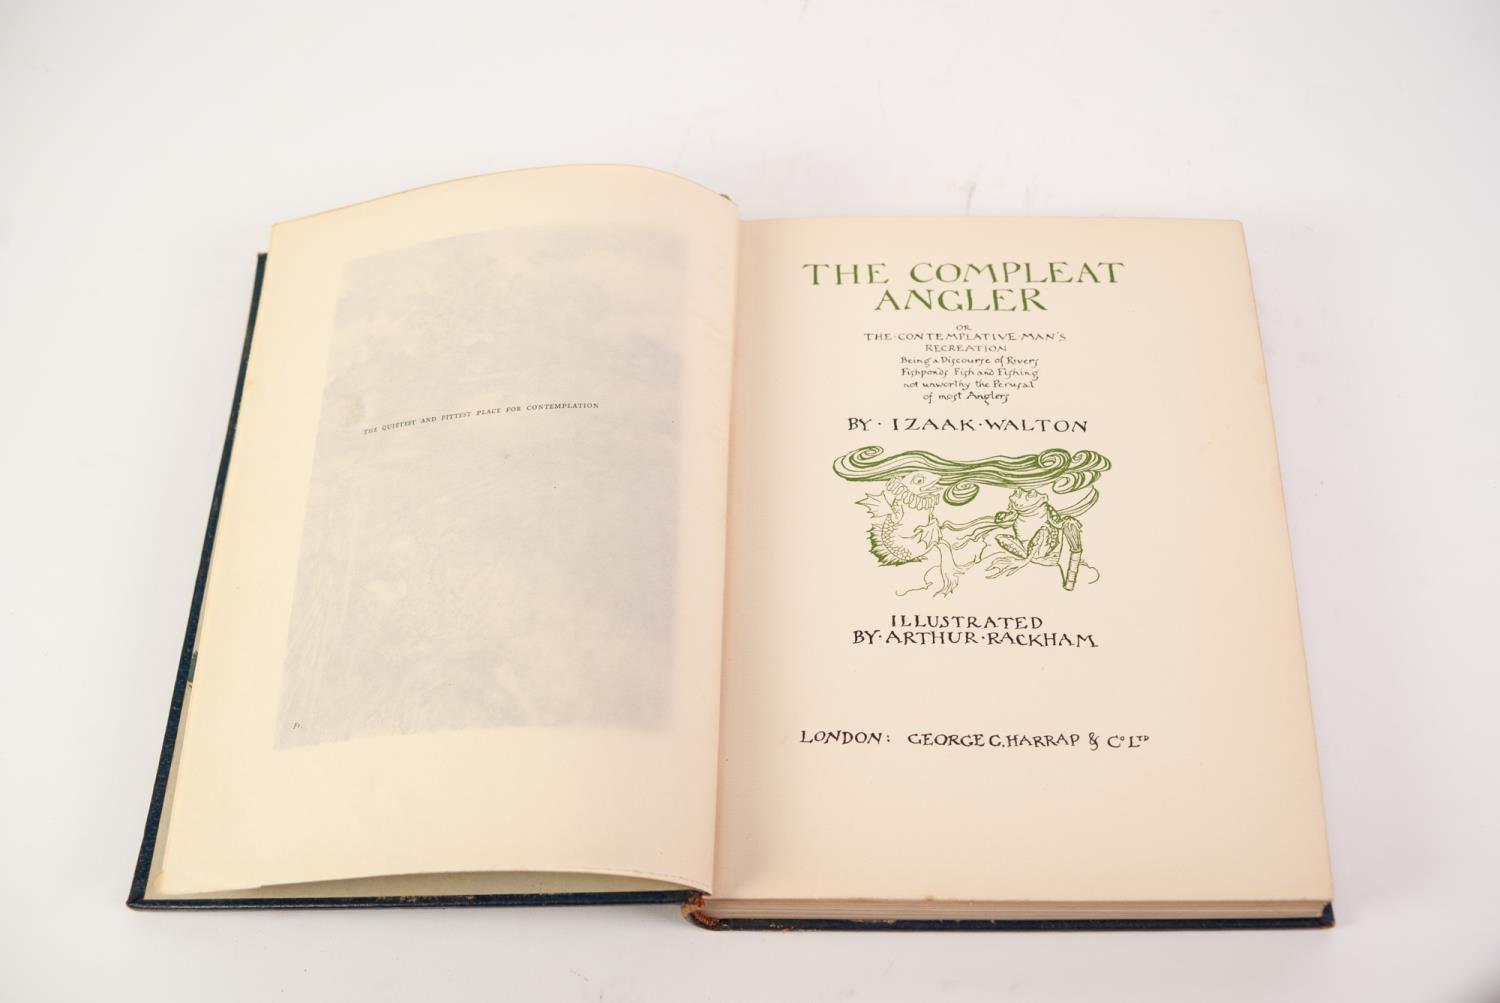 IZAAK WALTON - THE COMPLEAT ANGLER, illustrated by Arthur Rackham, 1931 1st Ed thus This the - Image 2 of 6